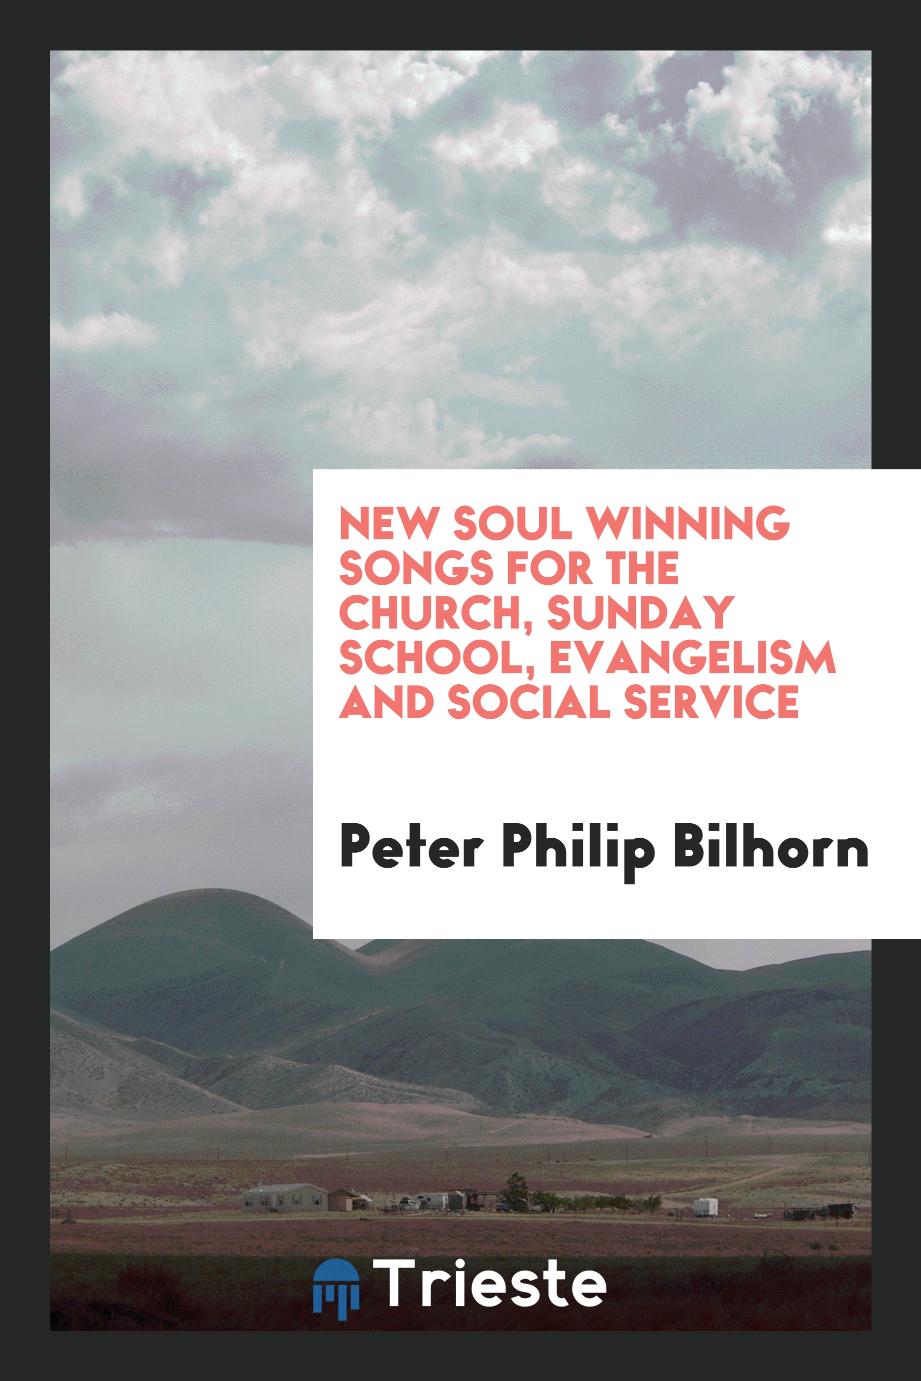 New soul winning songs for the church, Sunday school, evangelism and social service